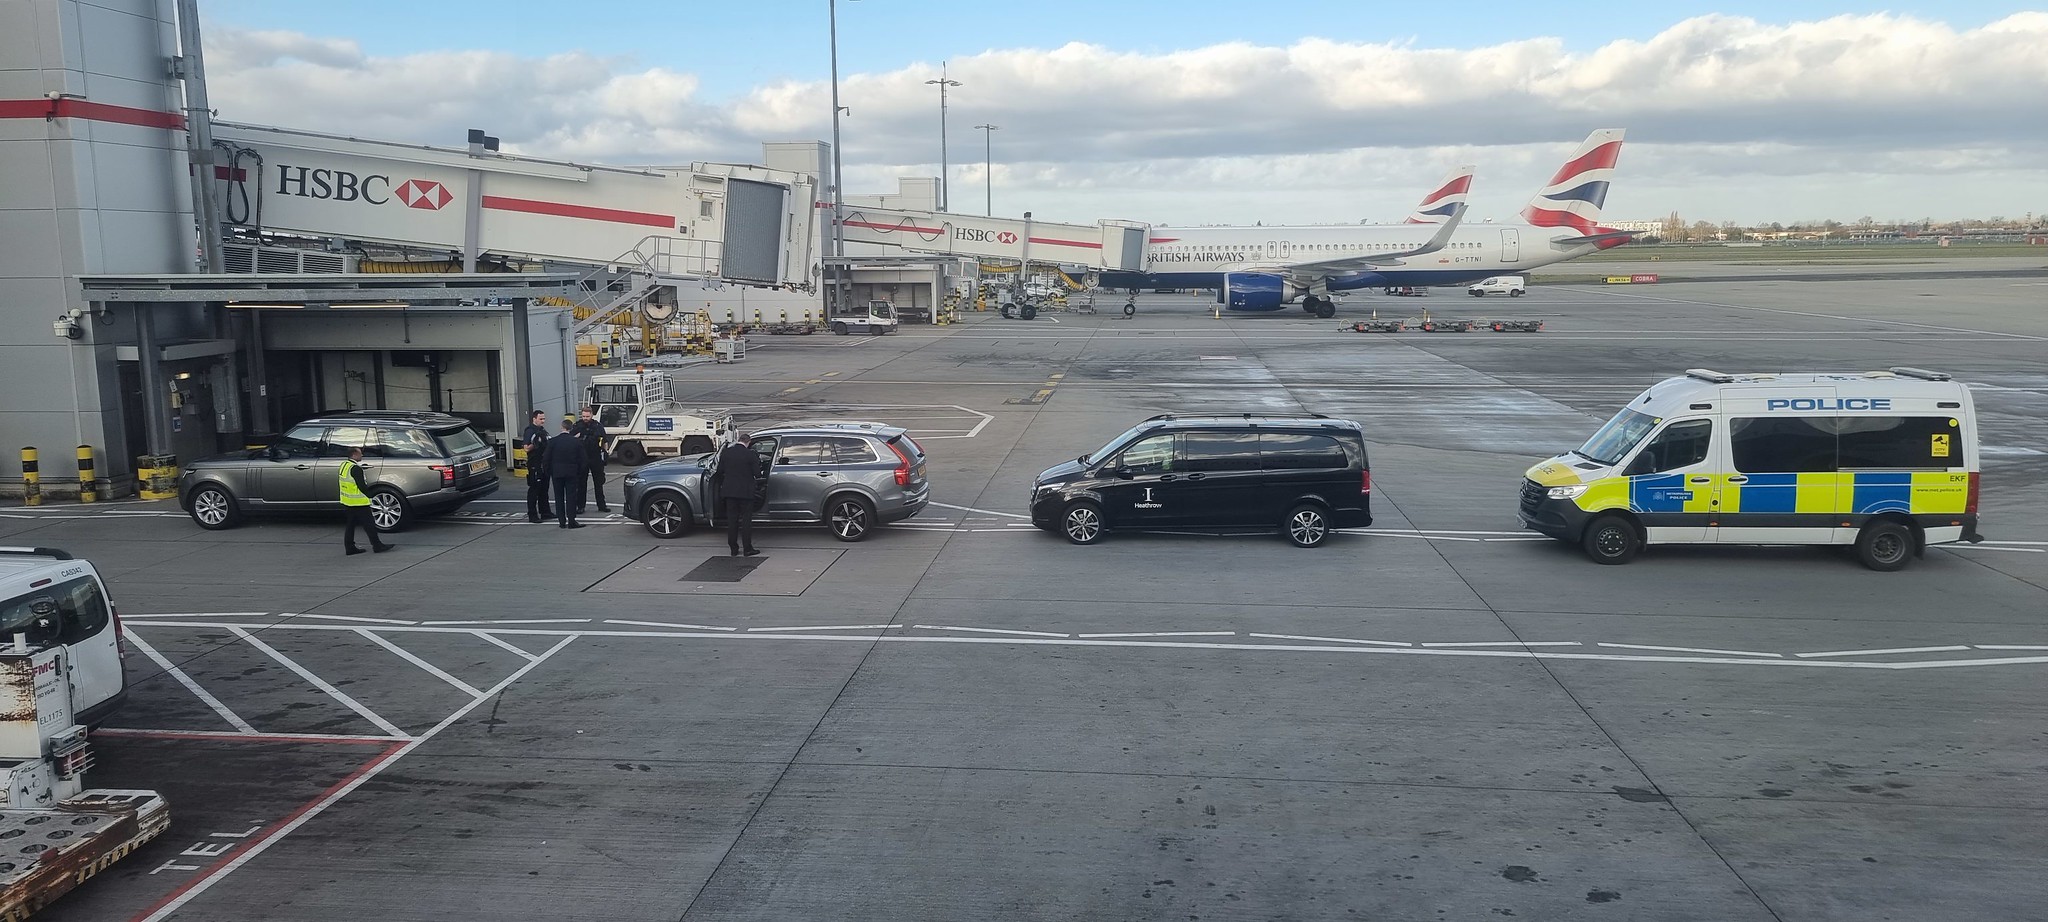 The convoy of vehicles awaiting arrival of a celeb at Gate A8 at Heathrow T5